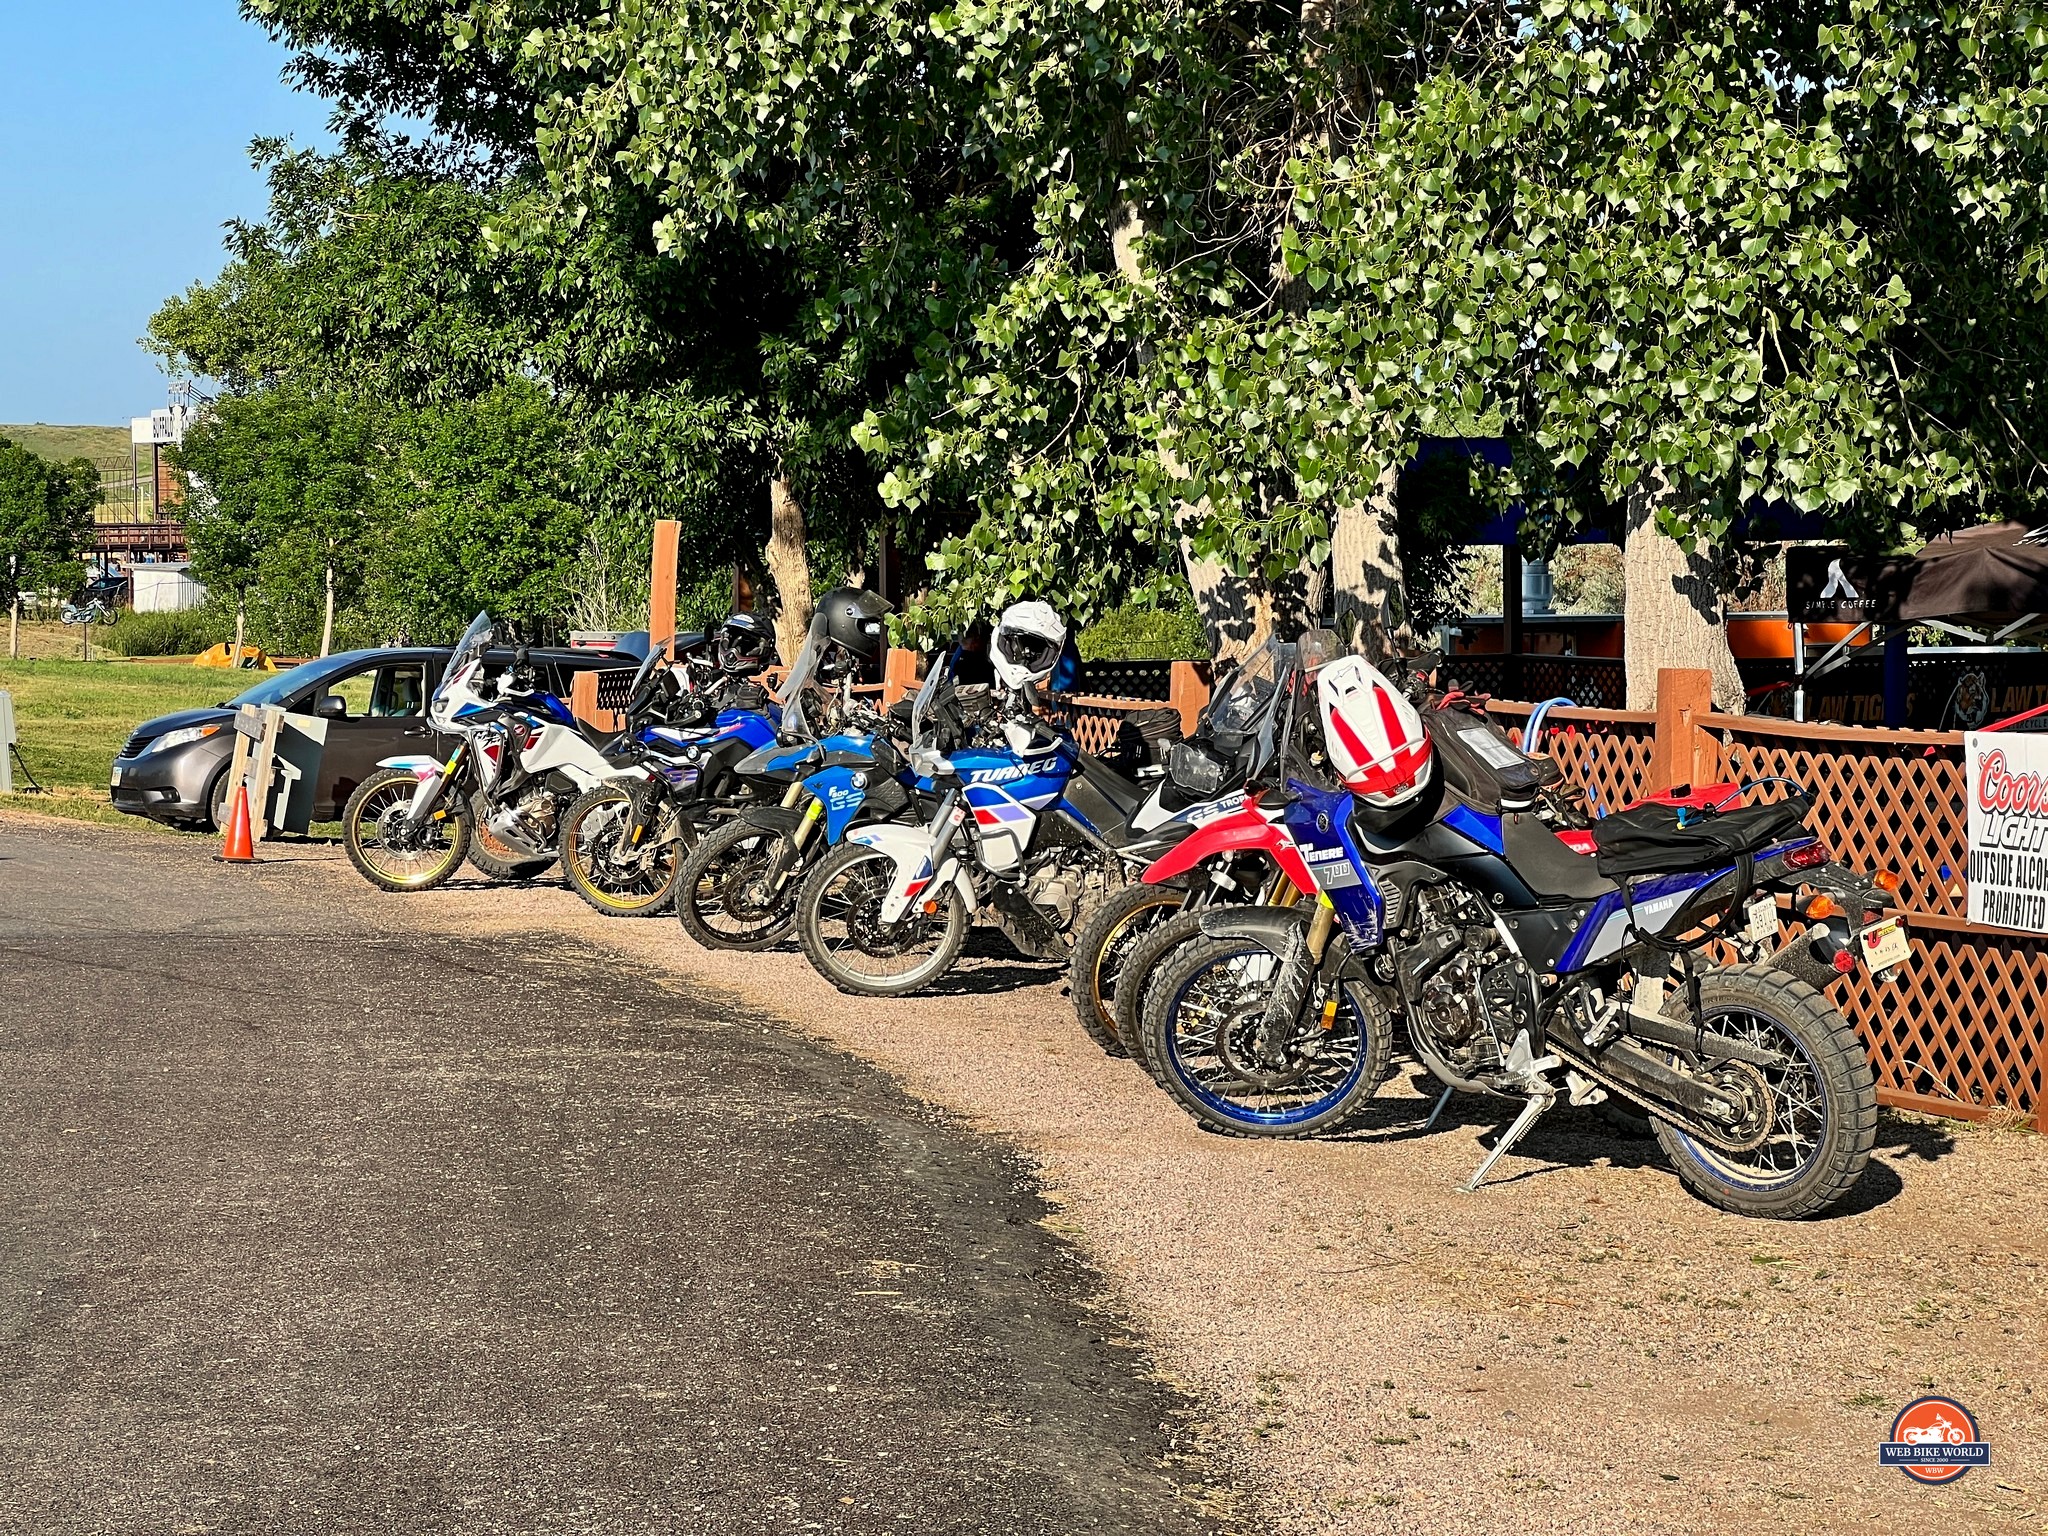 There was a wide variety of motorcycles represented at GOAF Sturgis 2023.